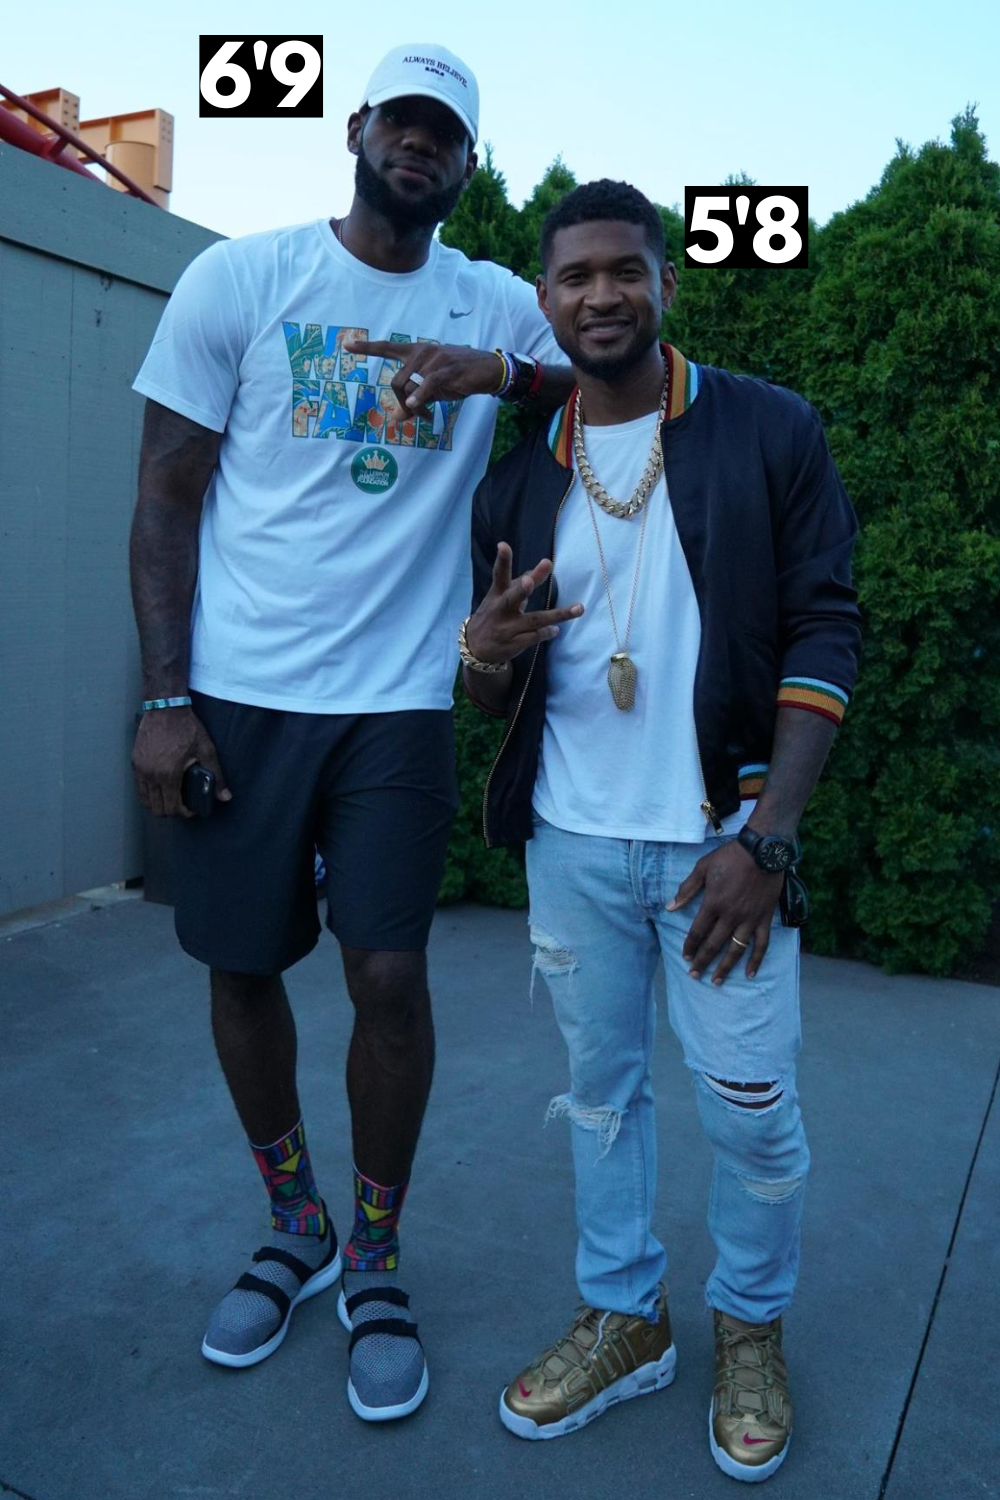 How tall is Usher